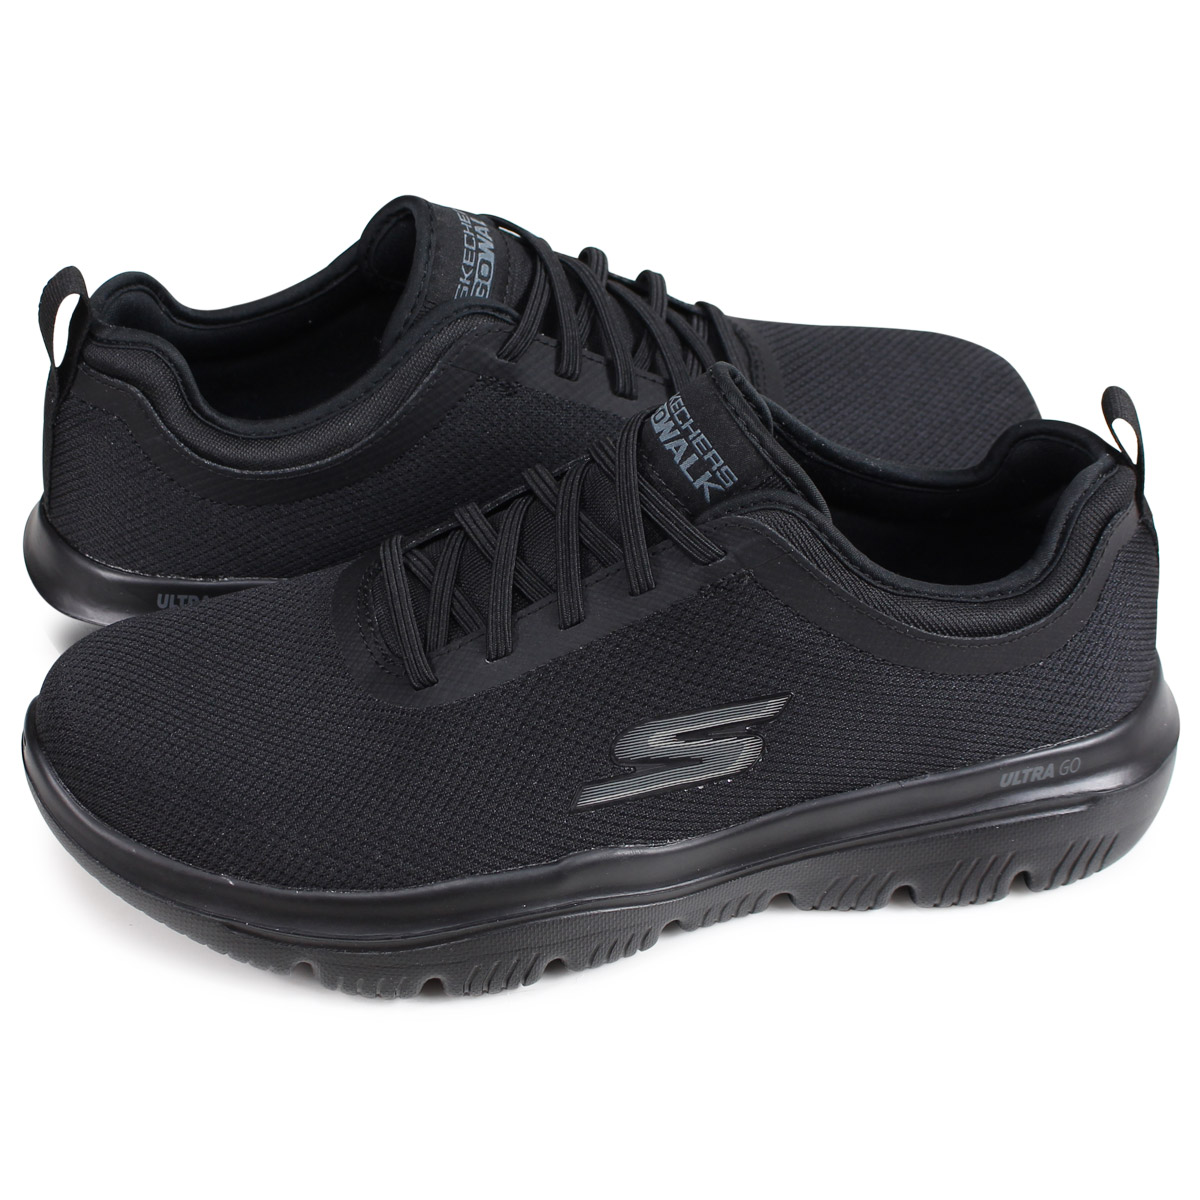 old style skechers shoes